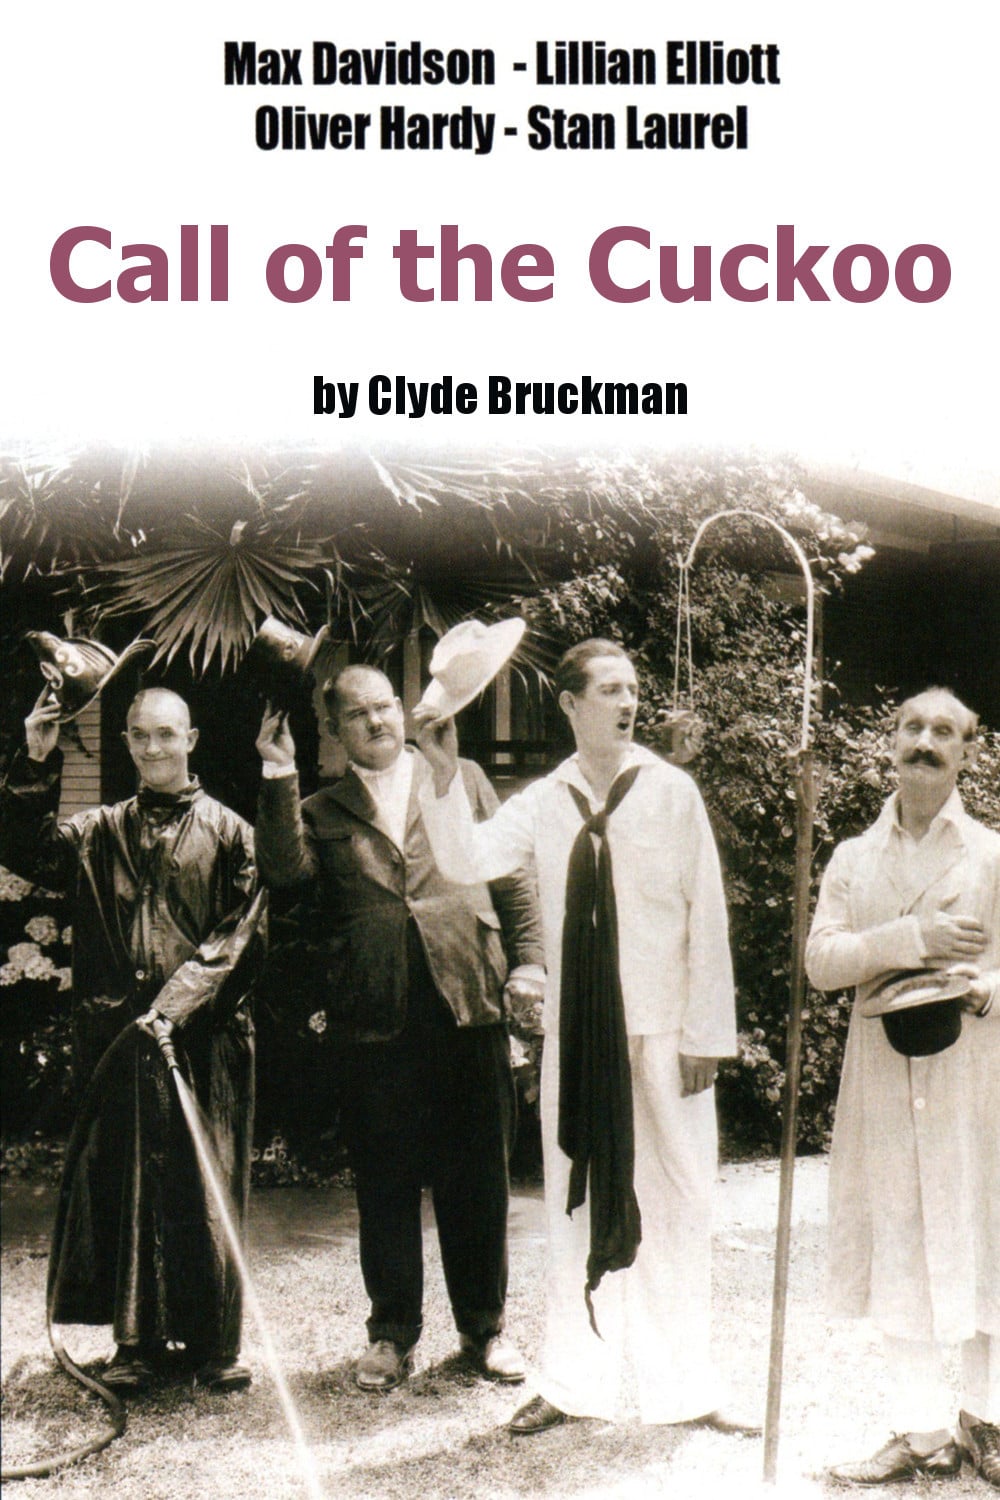 Poster for the movie "Call of the Cuckoo"